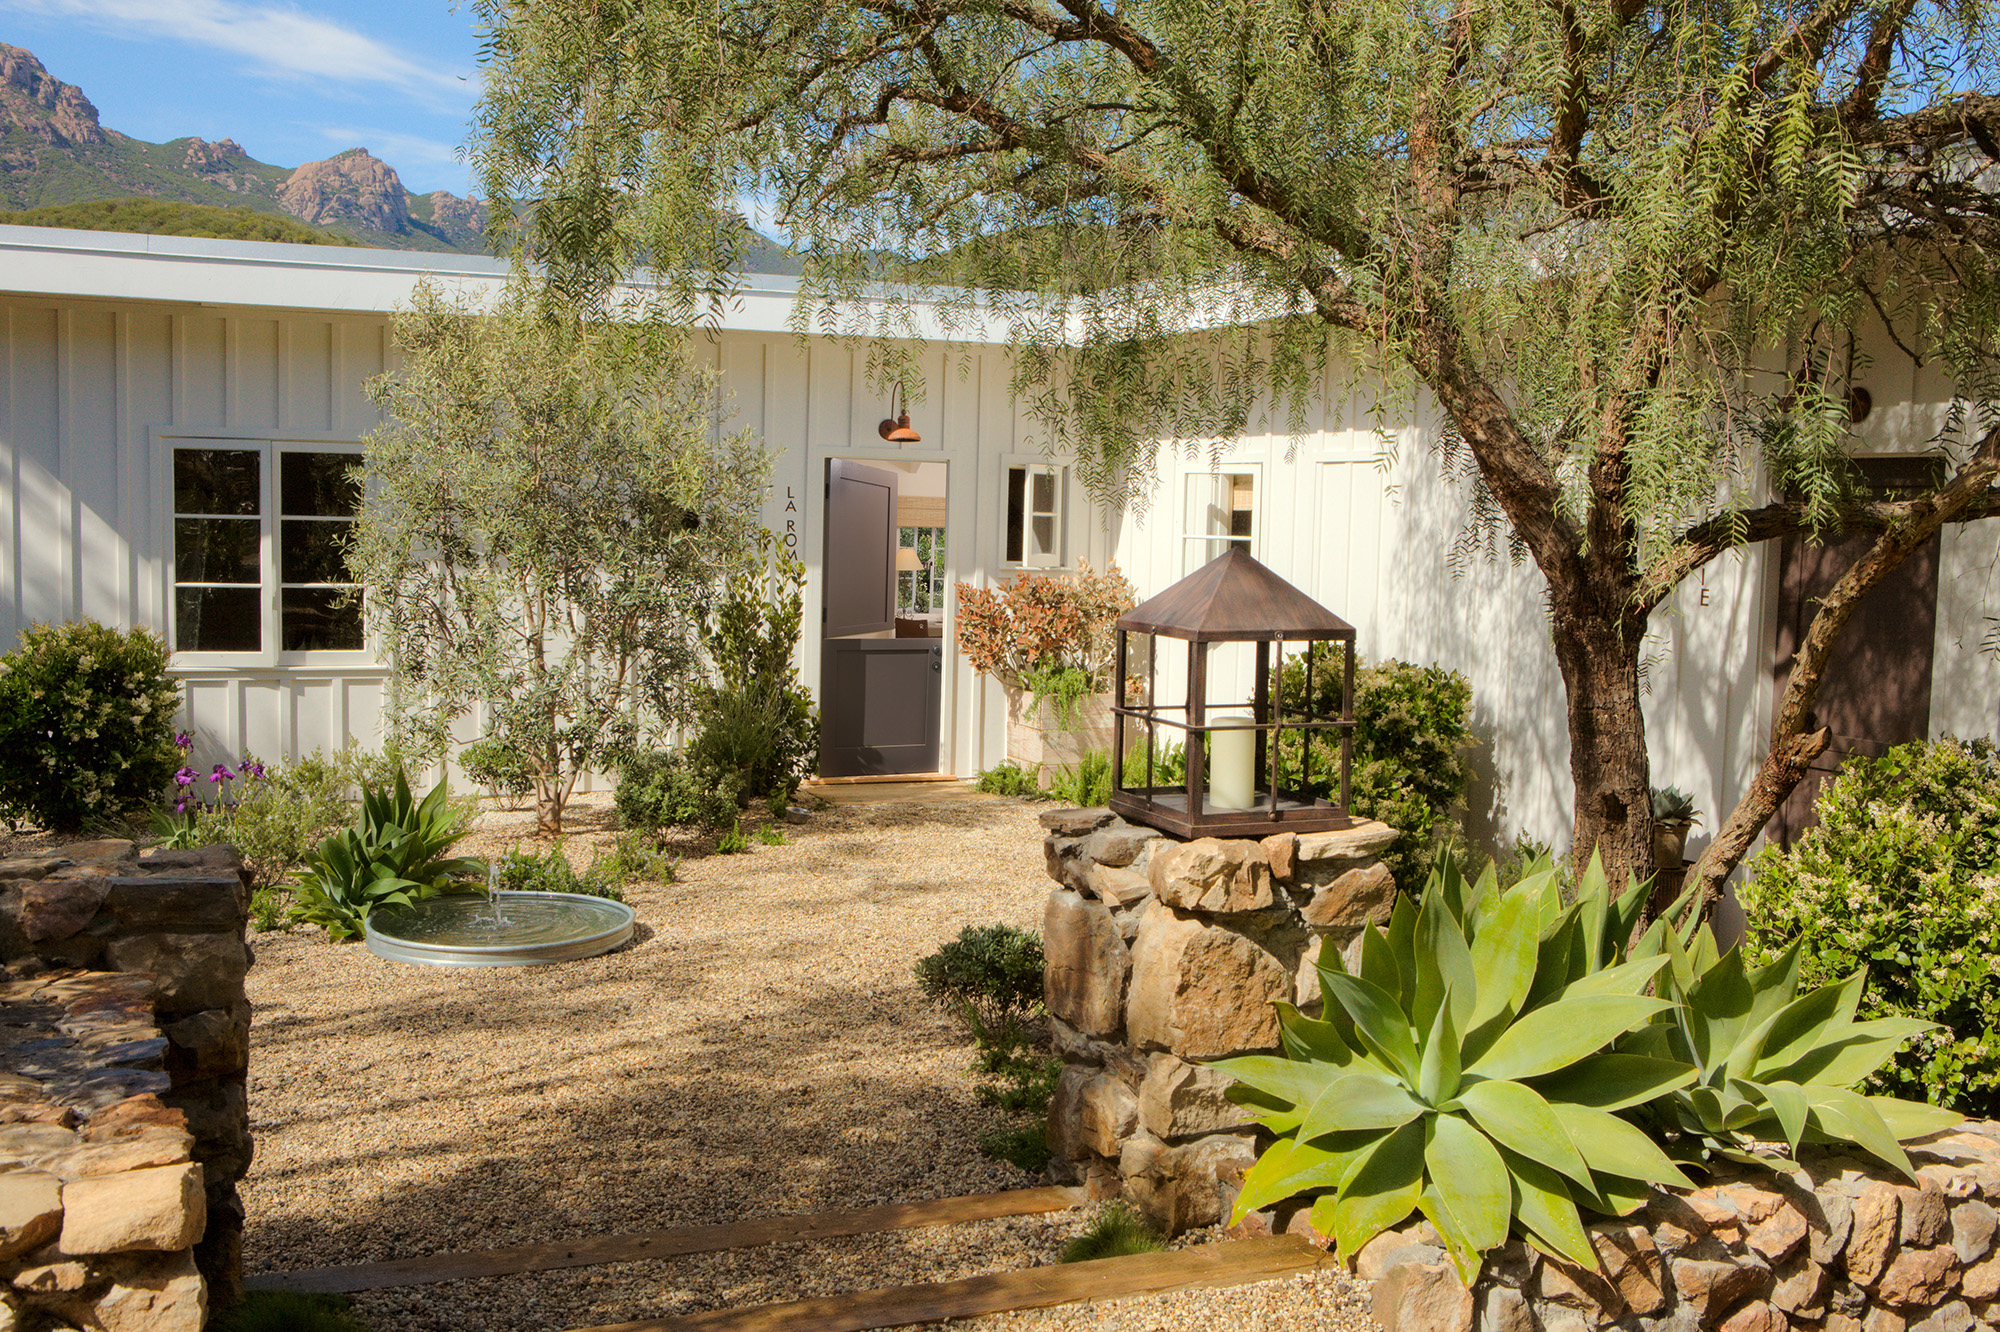 PHOTO: The exterior of a guest room at The Ranch Malibu is photographed here.